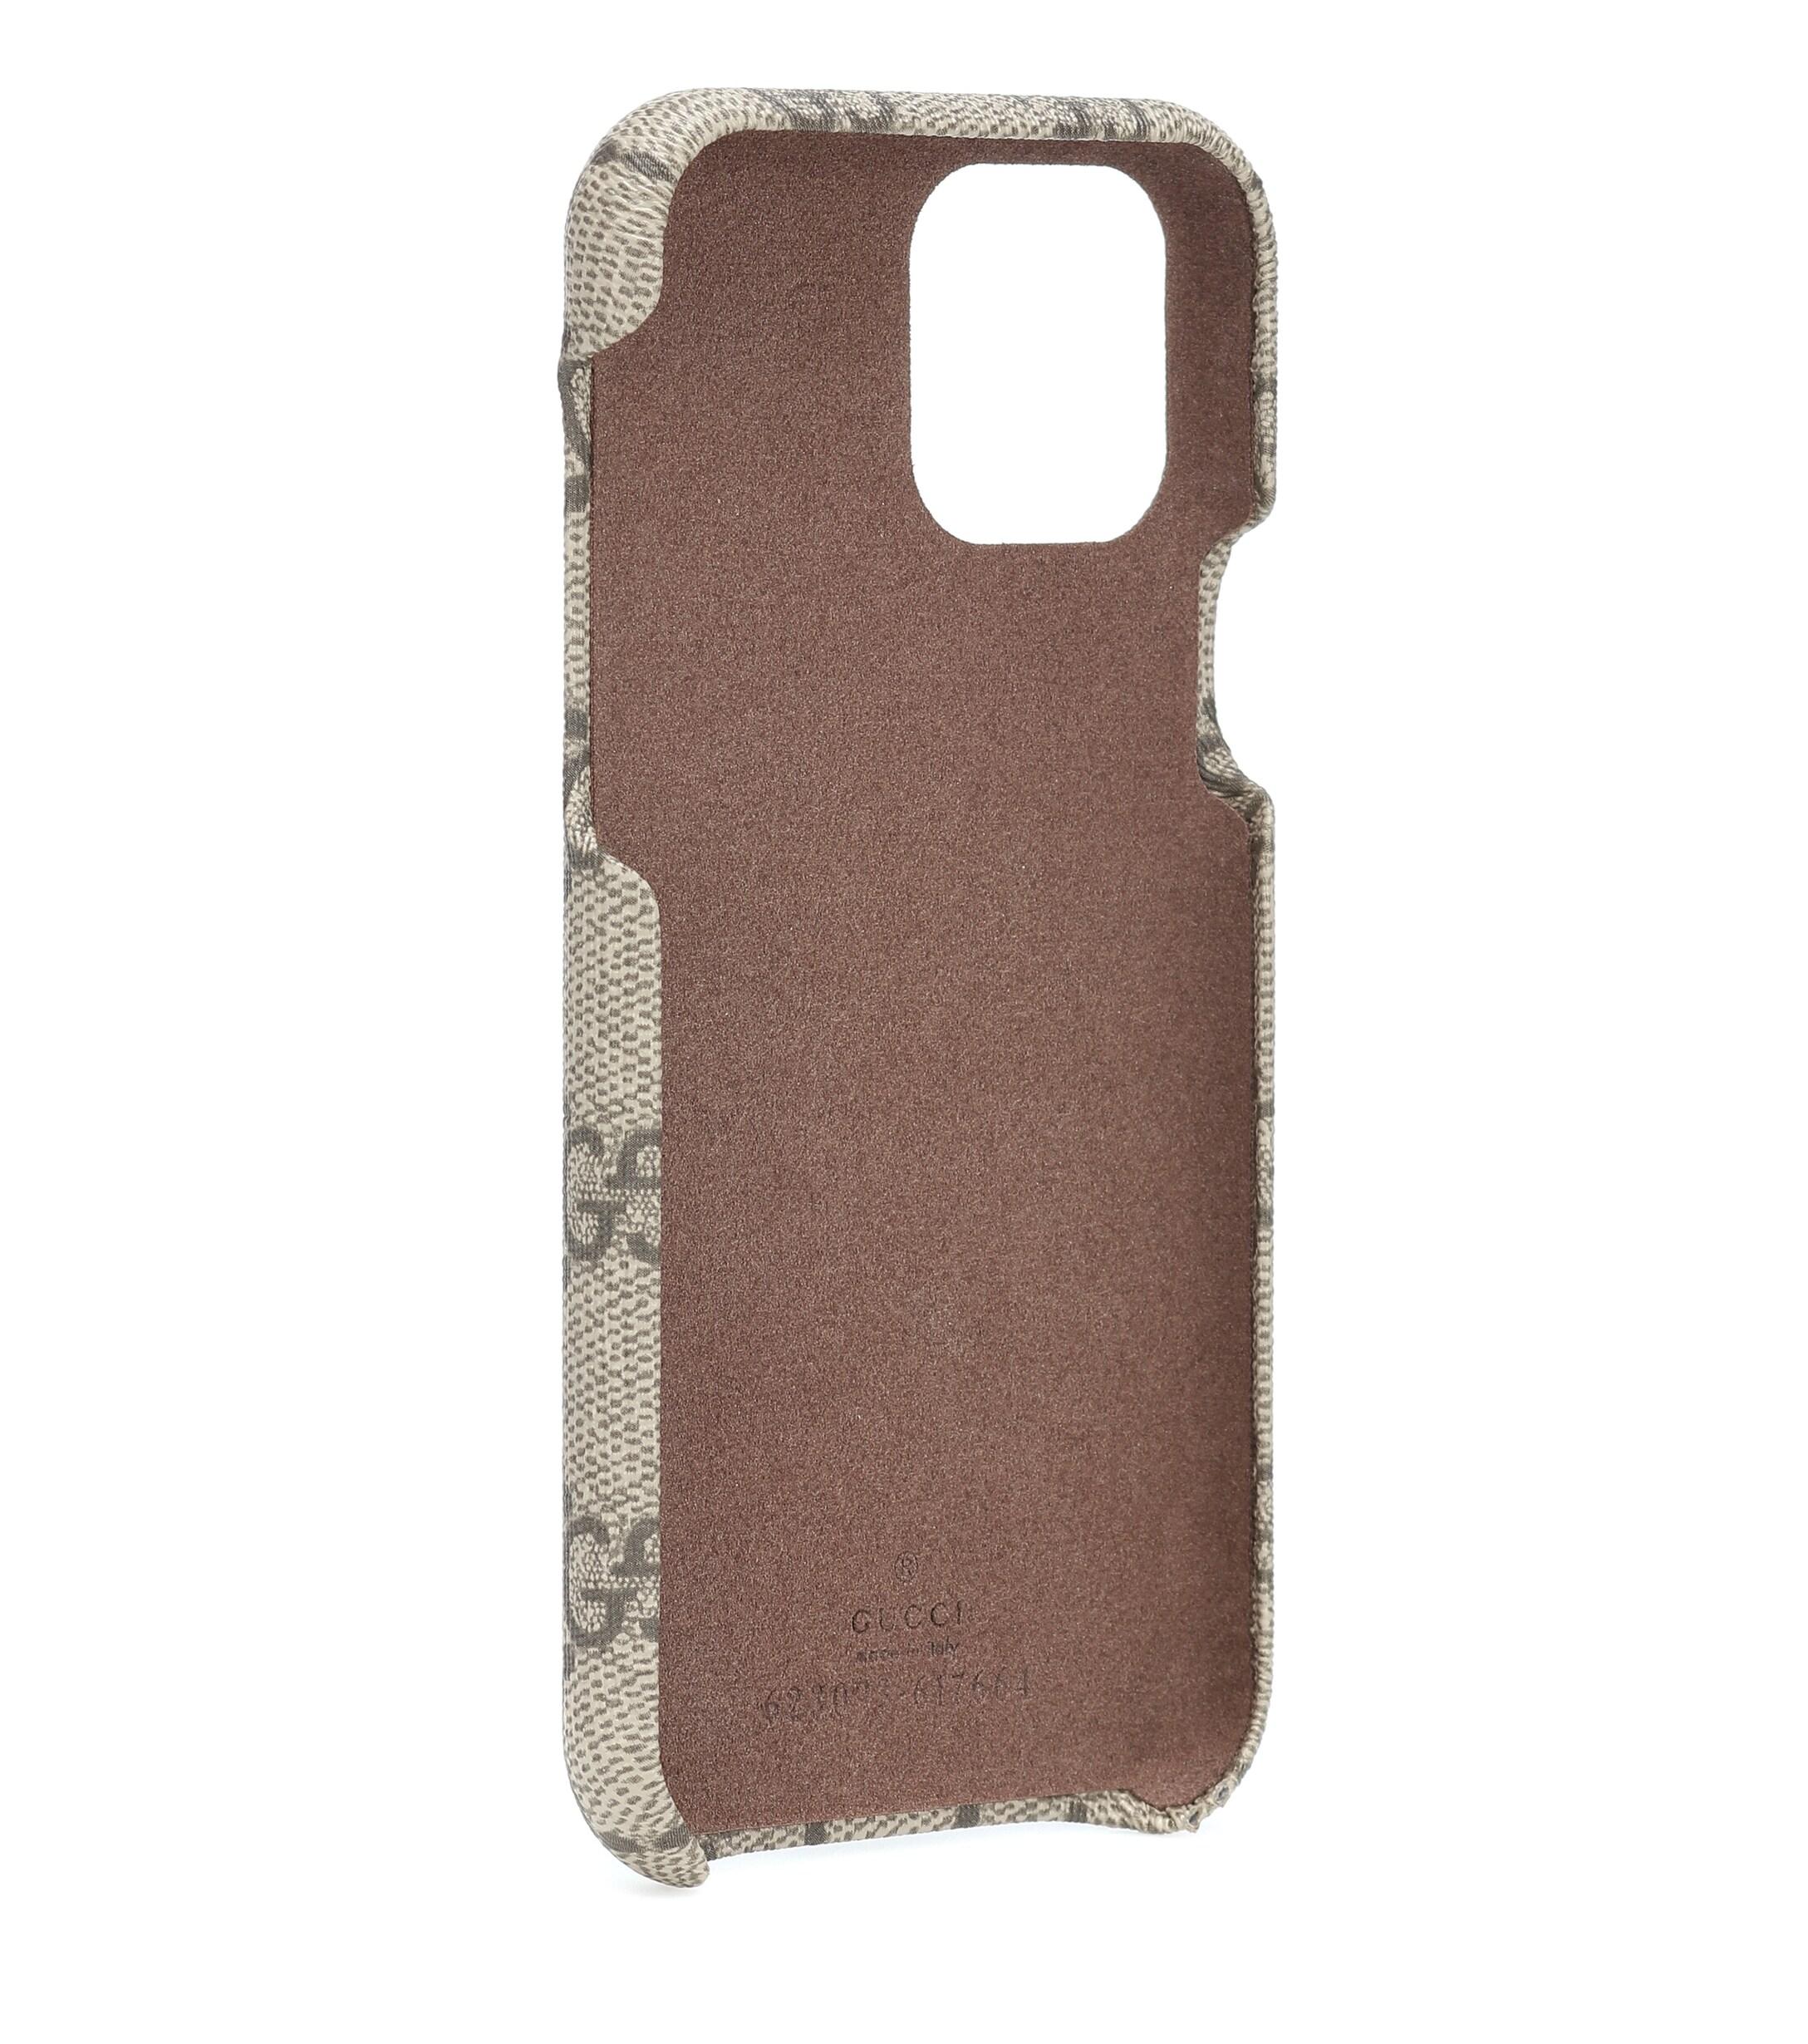 Gucci Ophidia Case For Iphone 11 Pro Max in Beige (Natural) - Save 11% -  Lyst